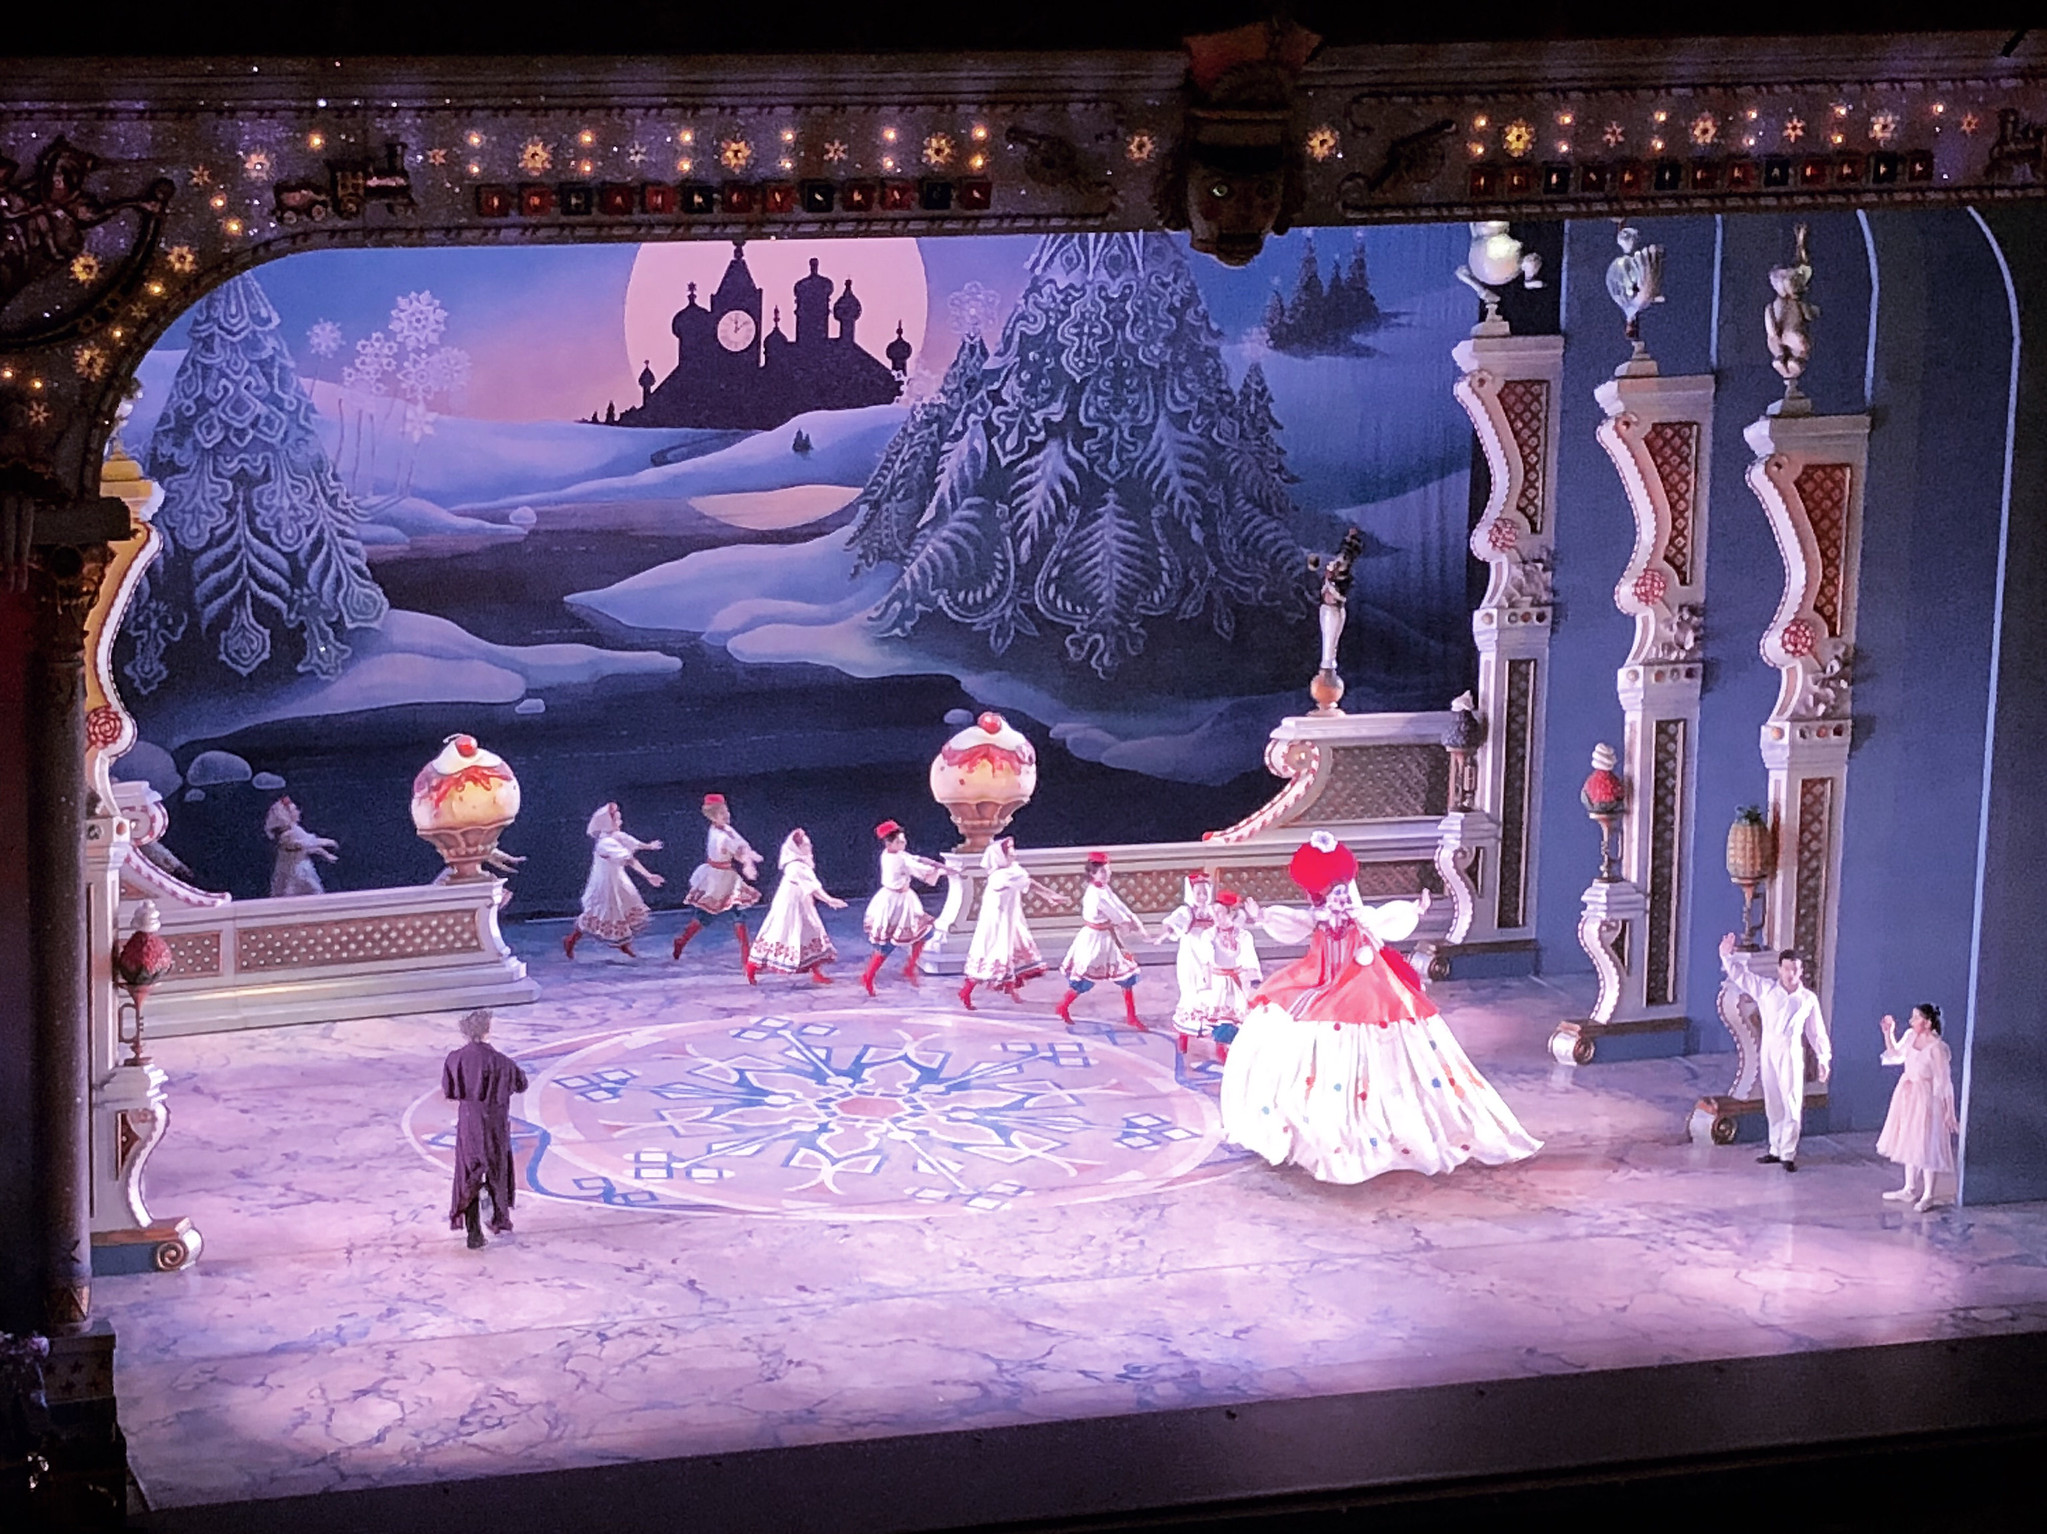 Debuted in 1977, the Milwaukee Ballet Company's annual performance of "The Nutcracker" remains a community favorite. This photograph is from the 2017 season. 